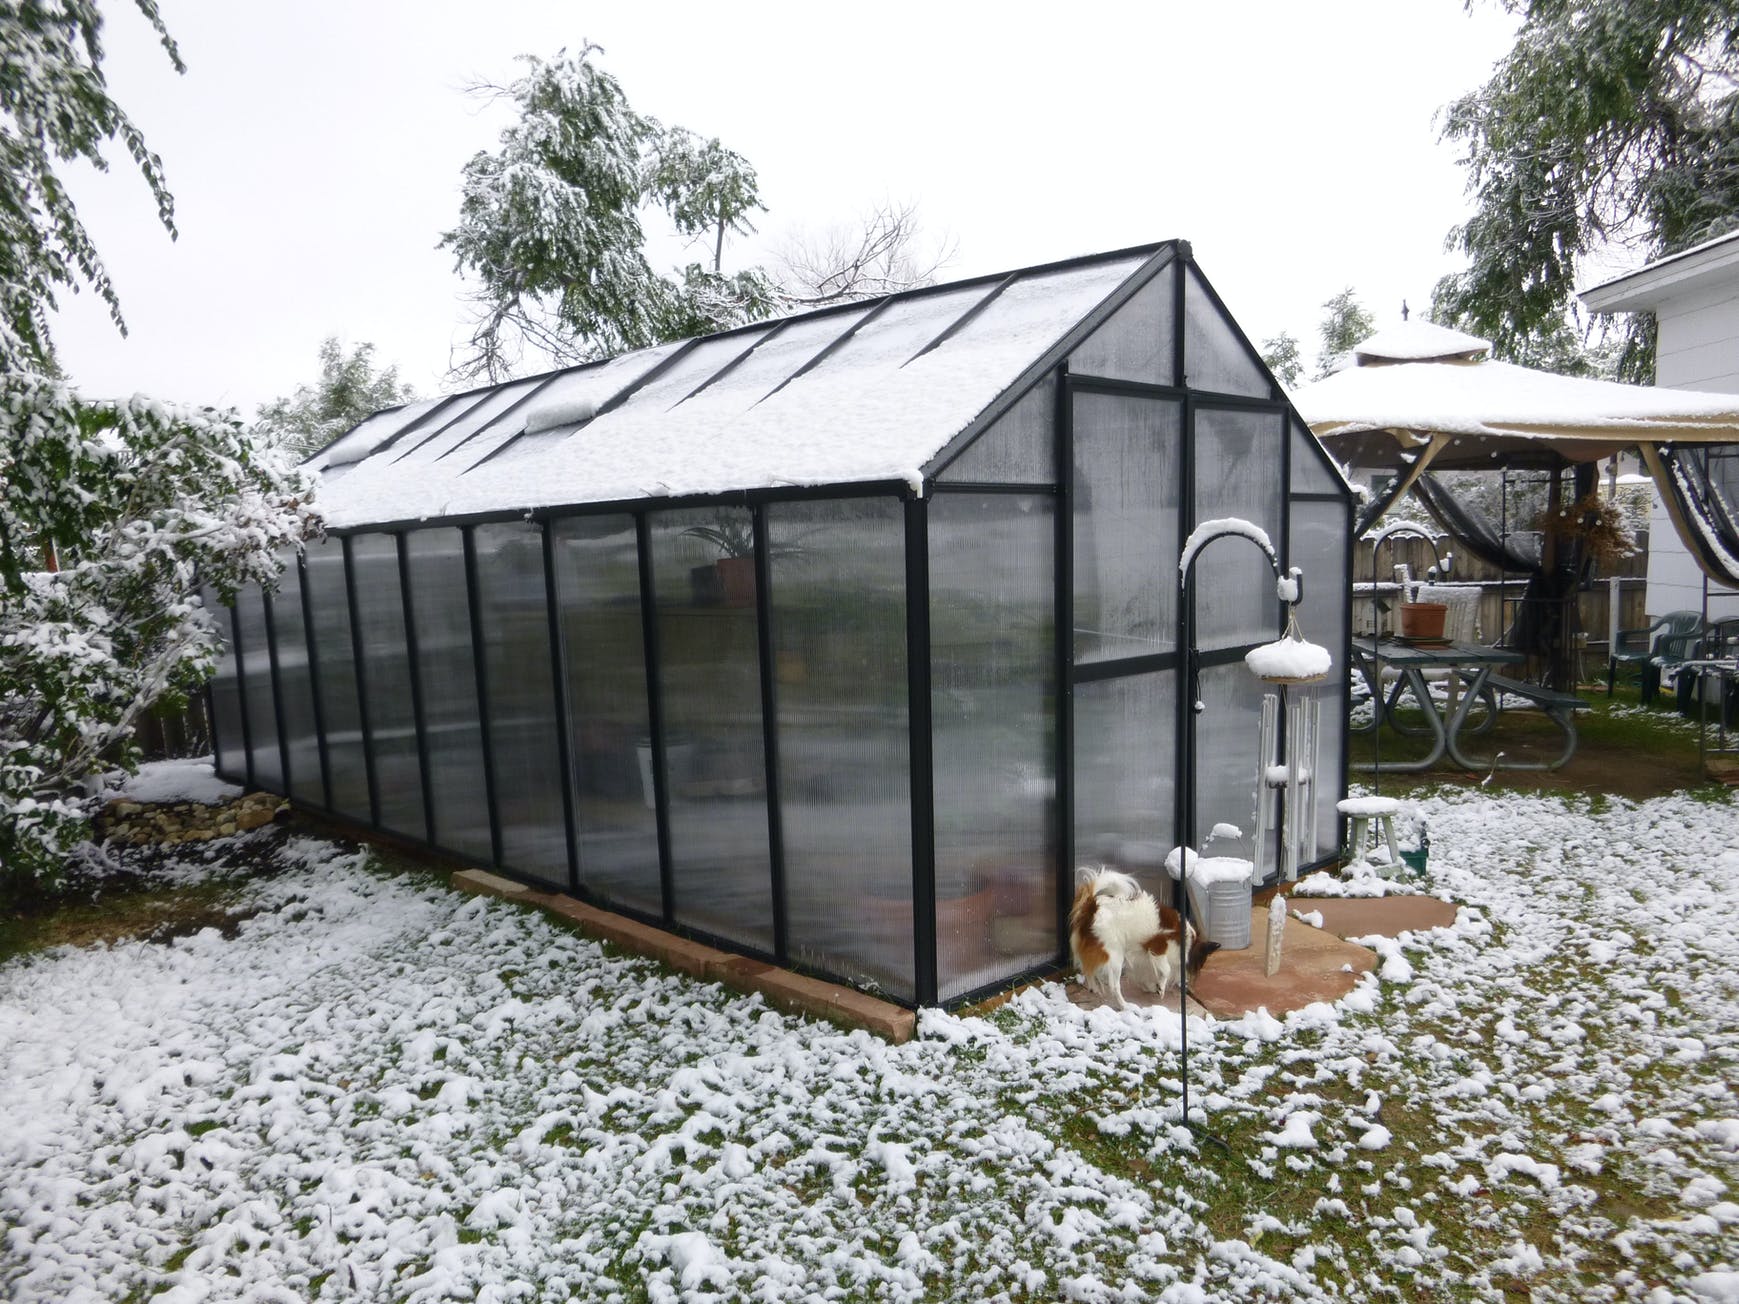 Embrace Winter Gardening: Why You Should Buy a Greenhouse During the Cold Season